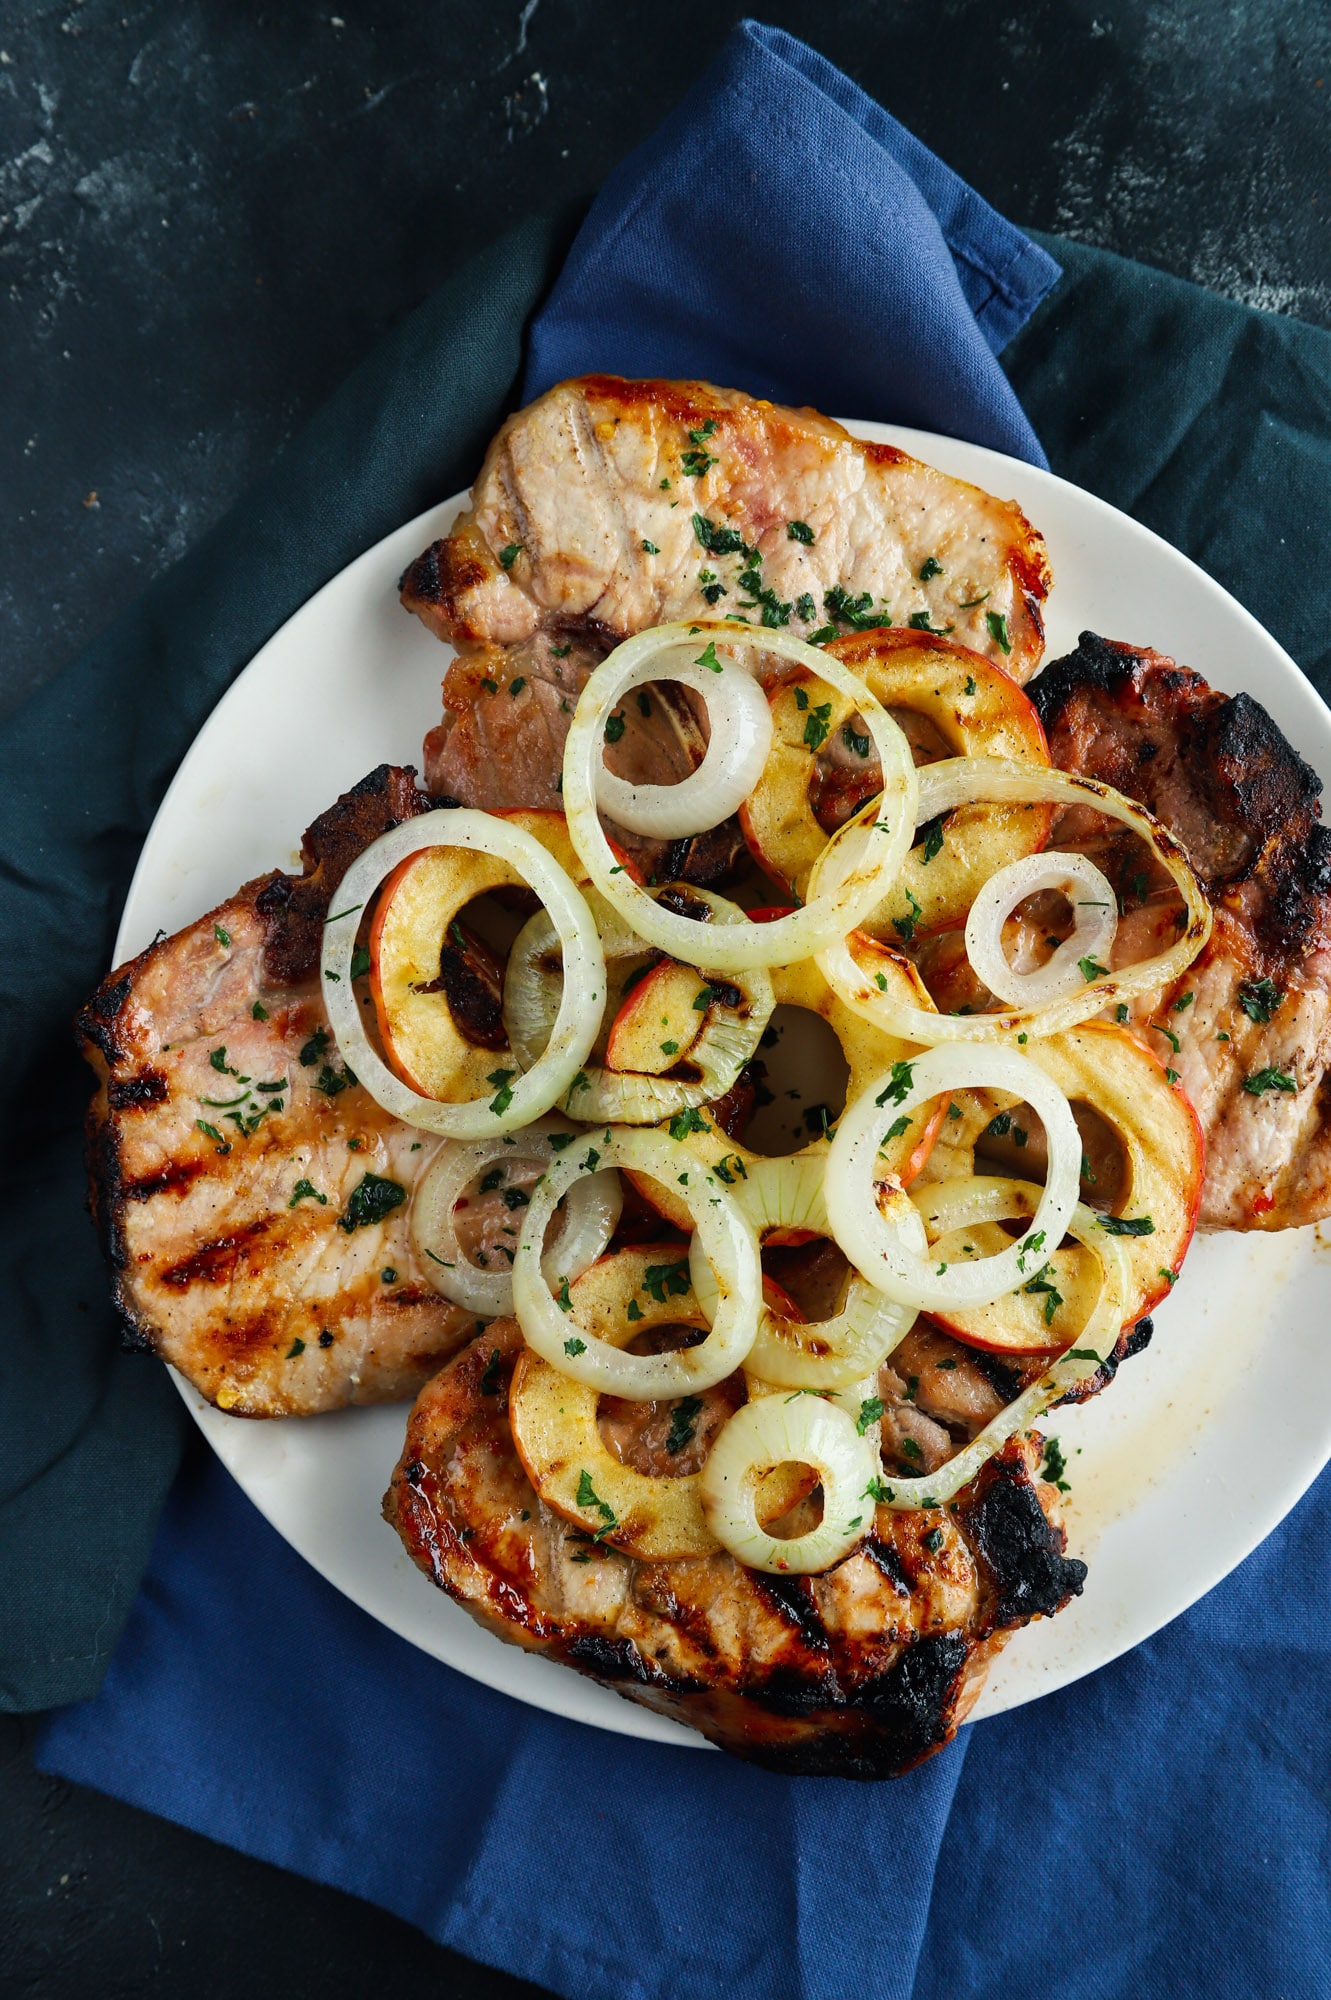 Grilled Pork Chops with Apples and Onion recipe for cooking on the grill grilled pork chops